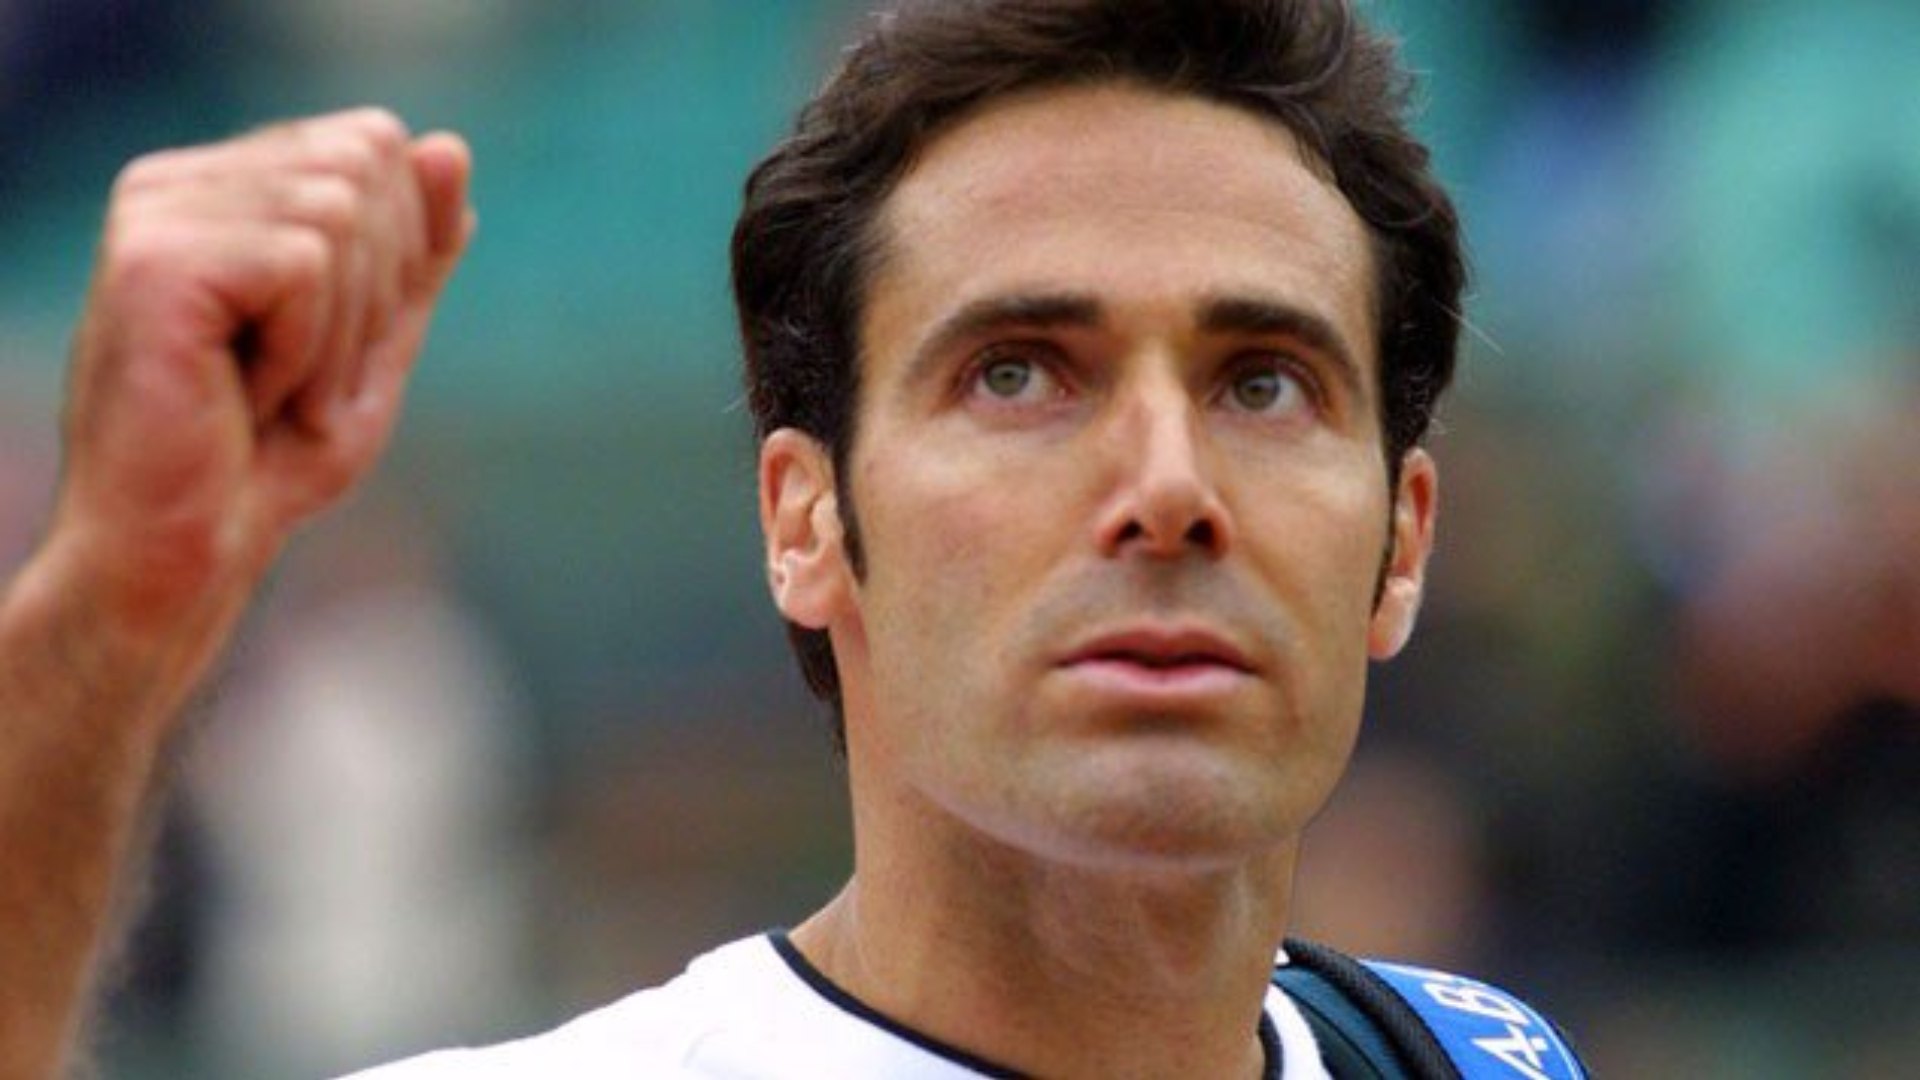 Alex Corretja - An under-rated Spanish Tennis star in the 90s